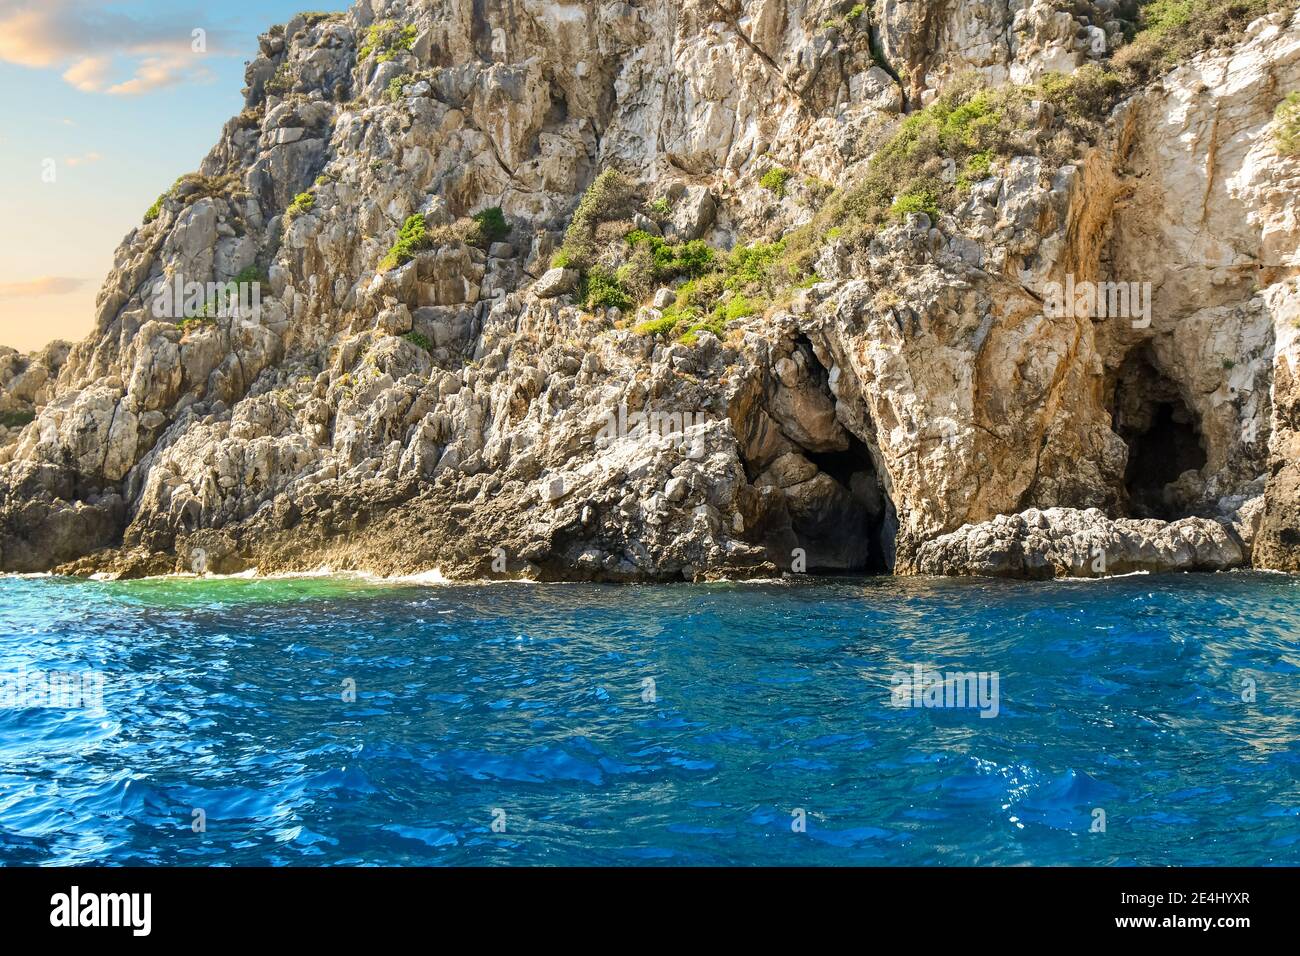 View from a boat near the Blue Eye cave on the coast of the Greek island of Corfu, Greece. Stock Photo